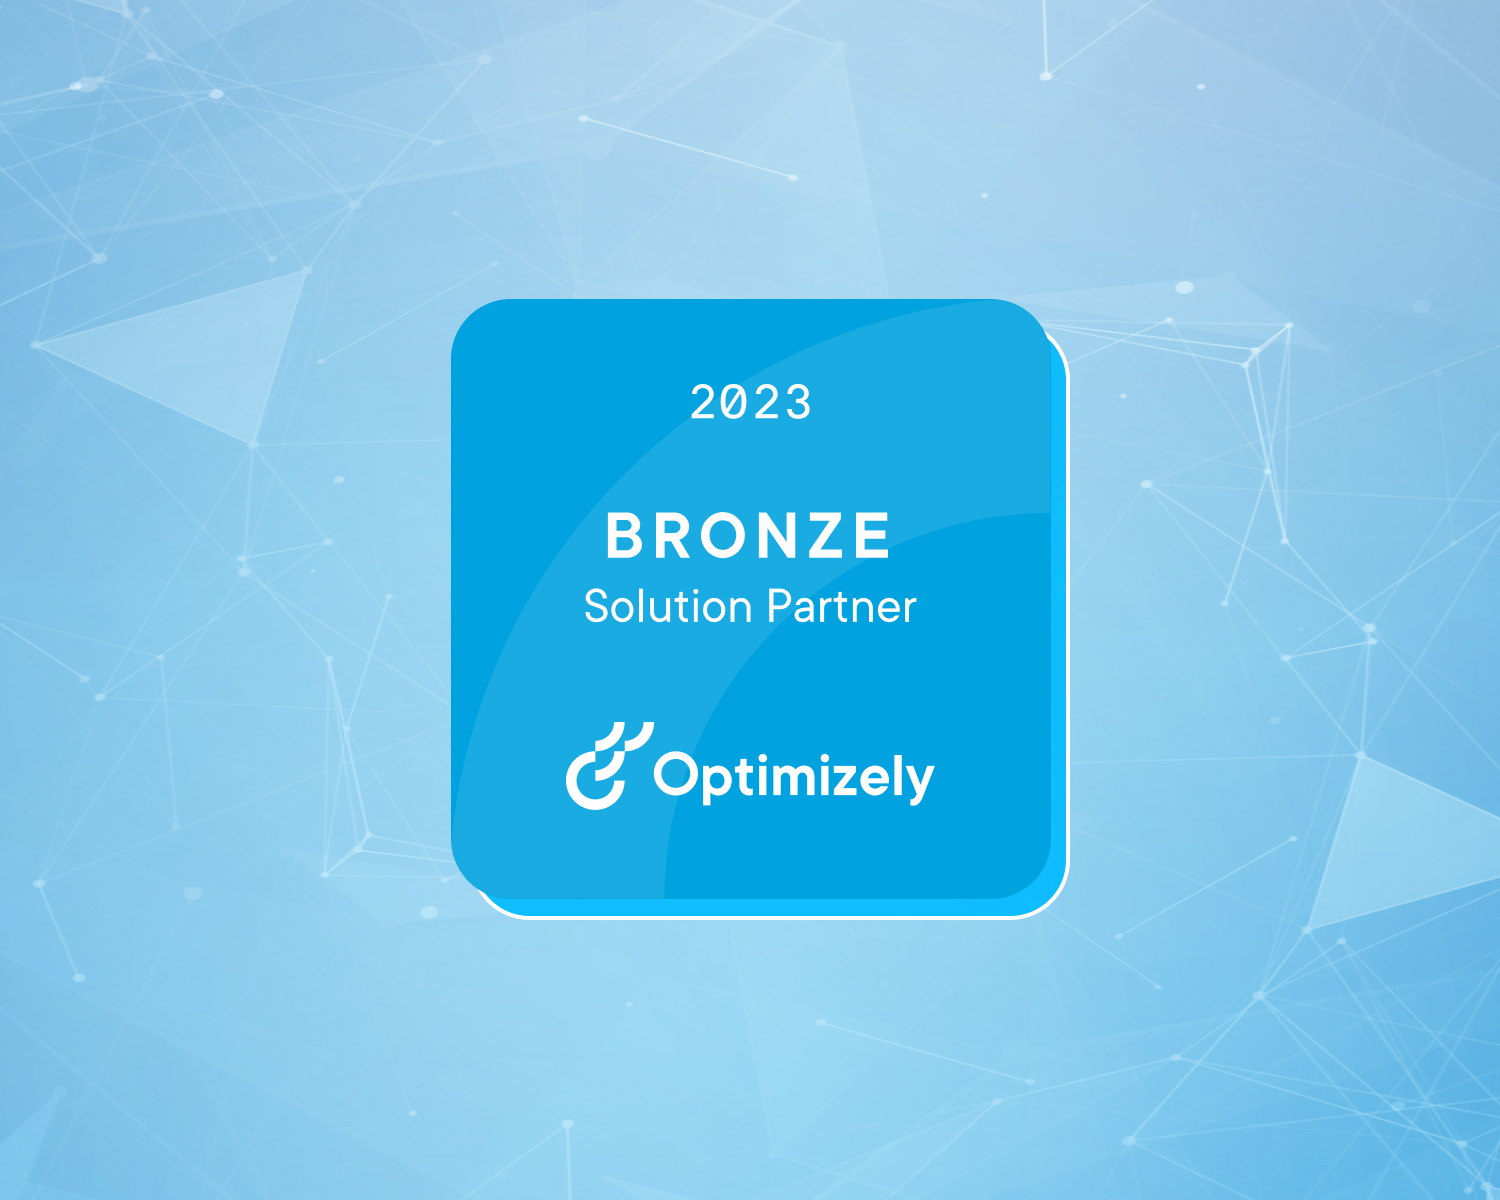 NIX Joins Optimizely as Bronze Solution Partner to Help Customers Unlock Digital Potential